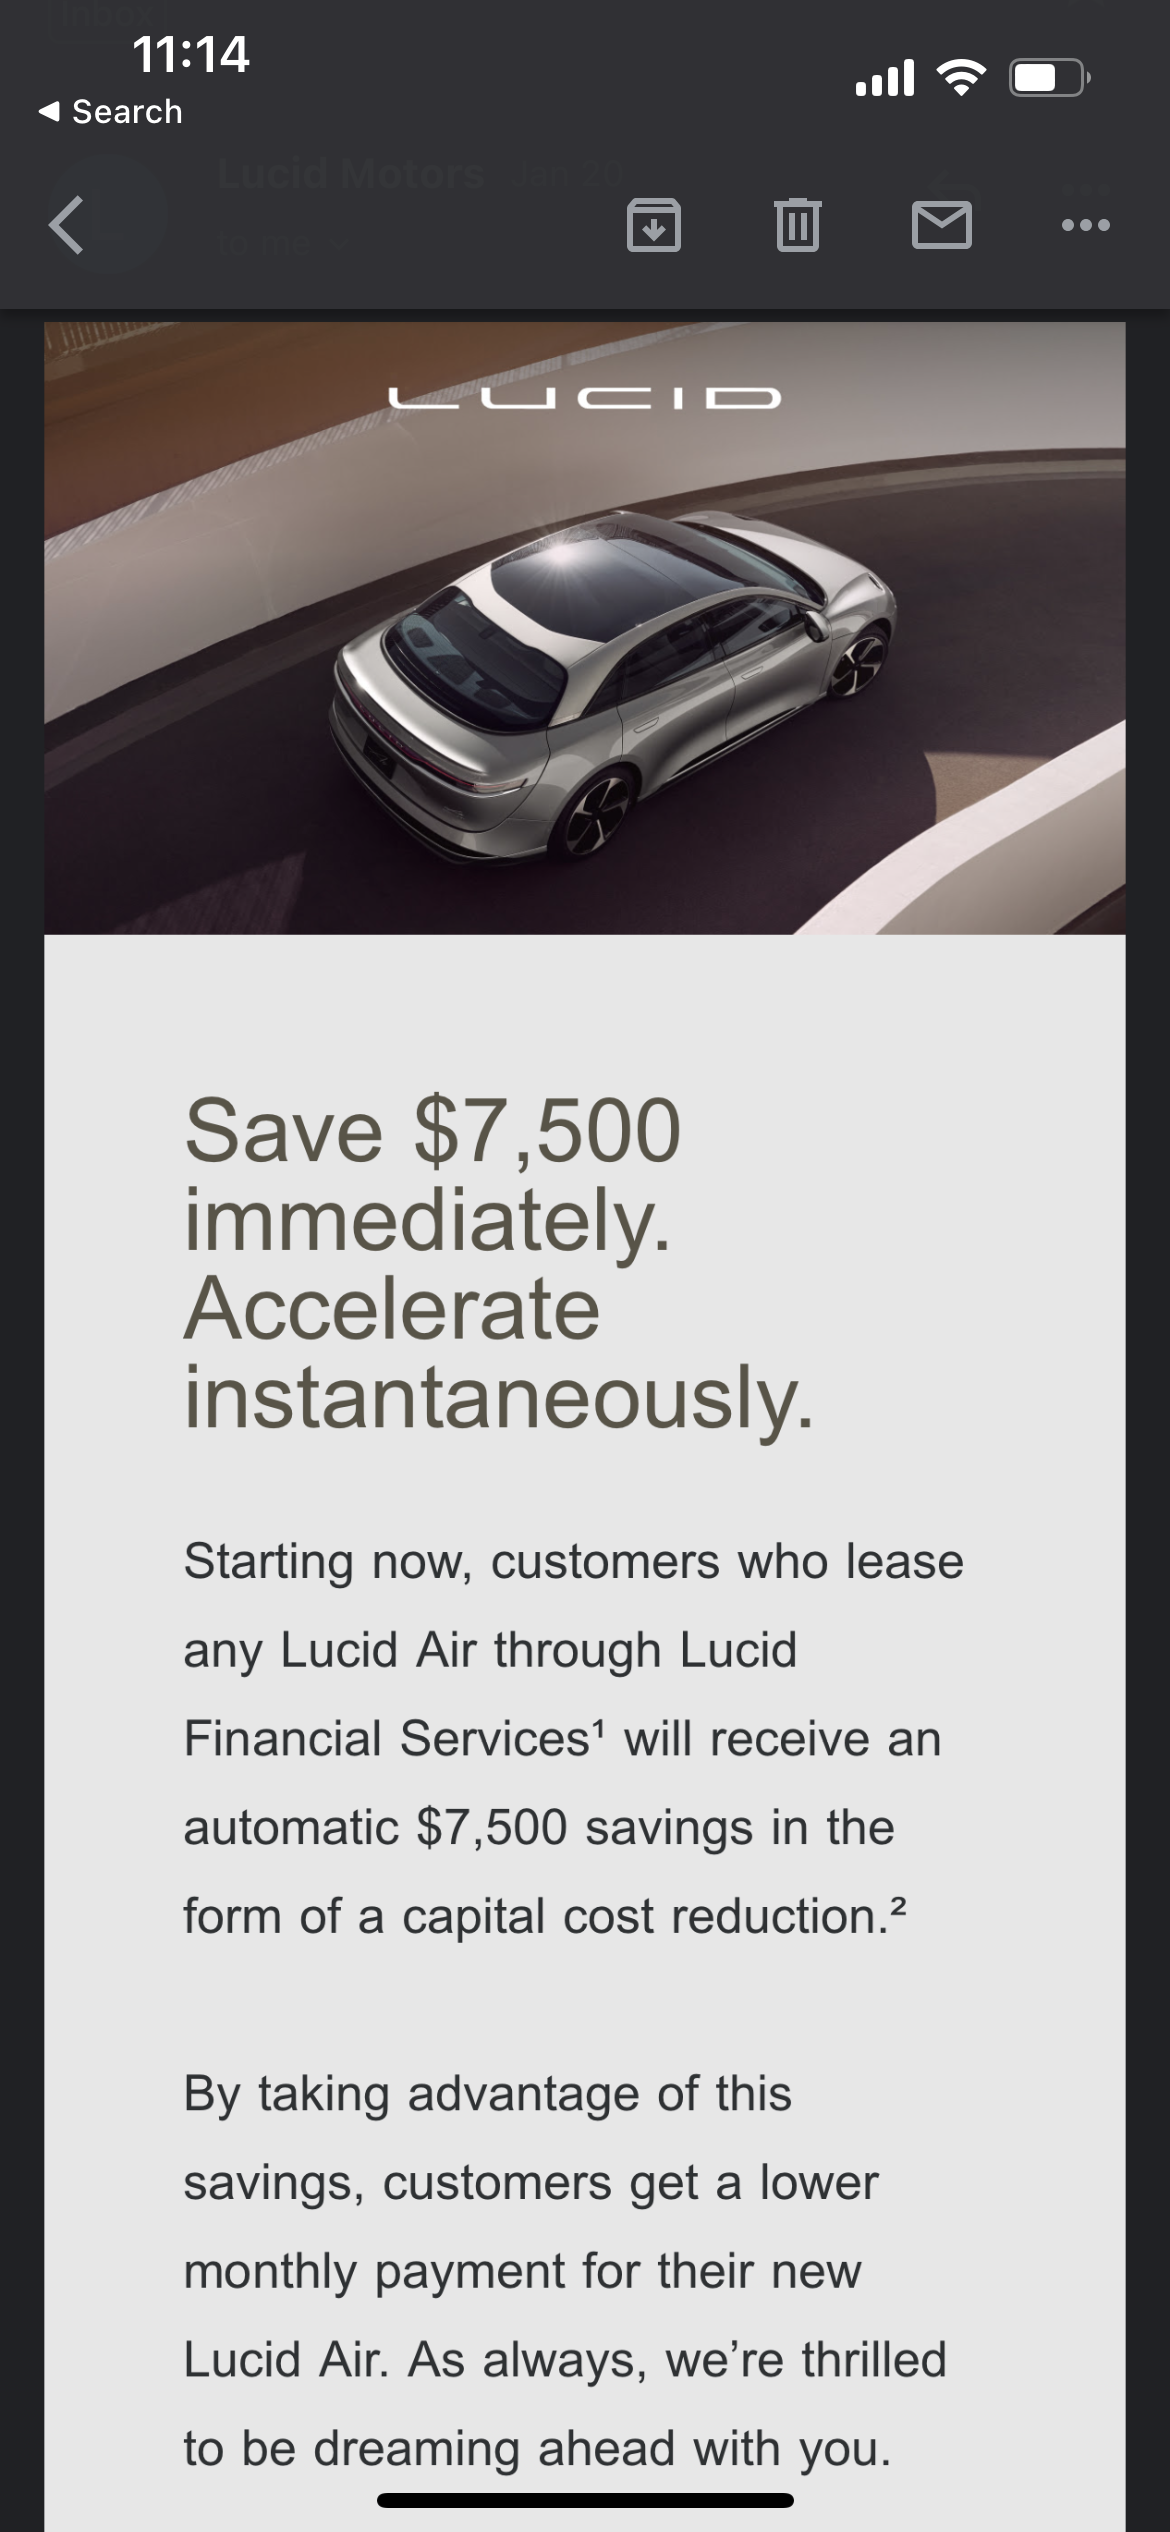 Lucid Lease FB Ad including full IRA incentive